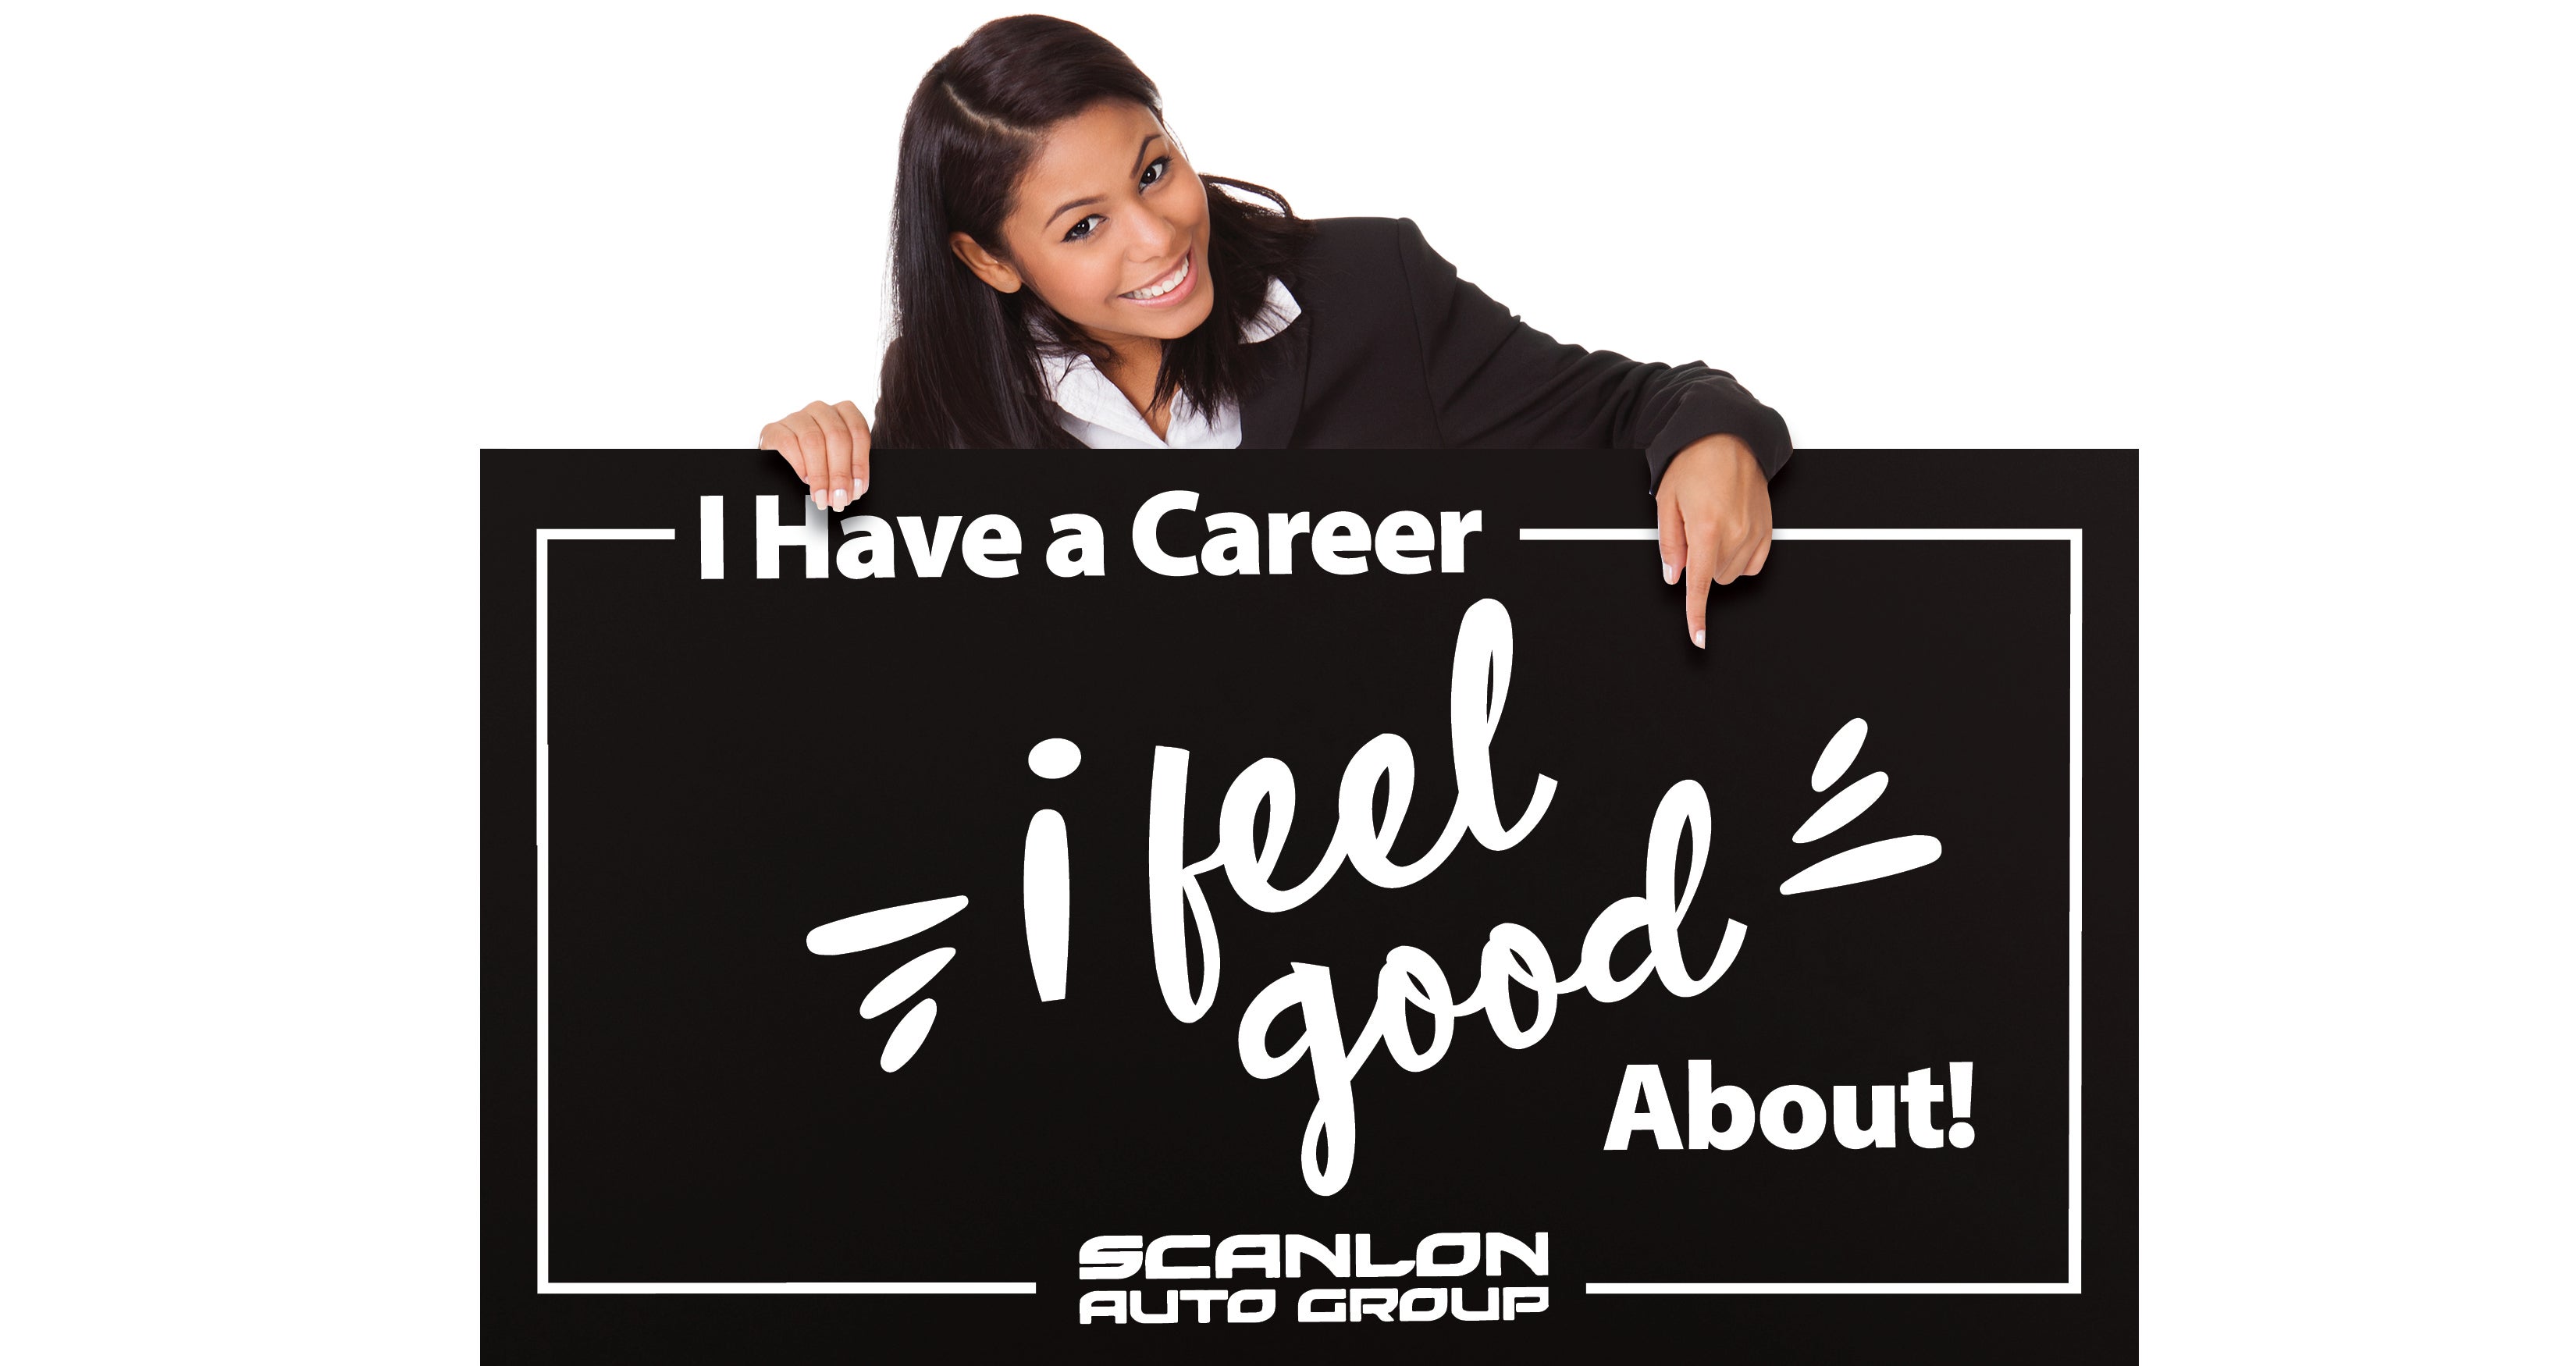 What Our Customers Are Saying About Scanlon Auto Group